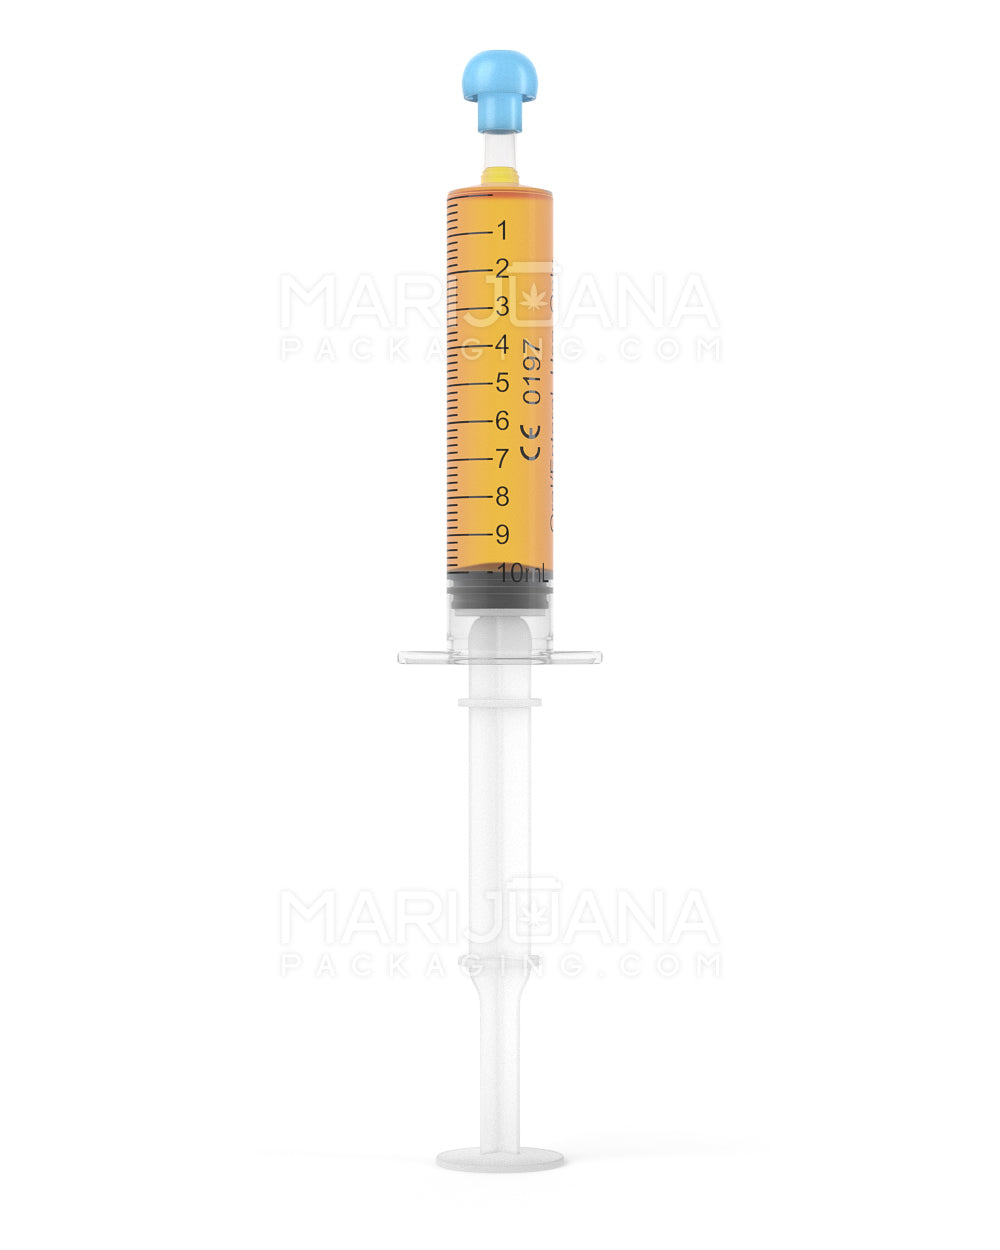 Plastic Oral Concentrate Syringes | 10mL - 1mL Increments | Sample - 2